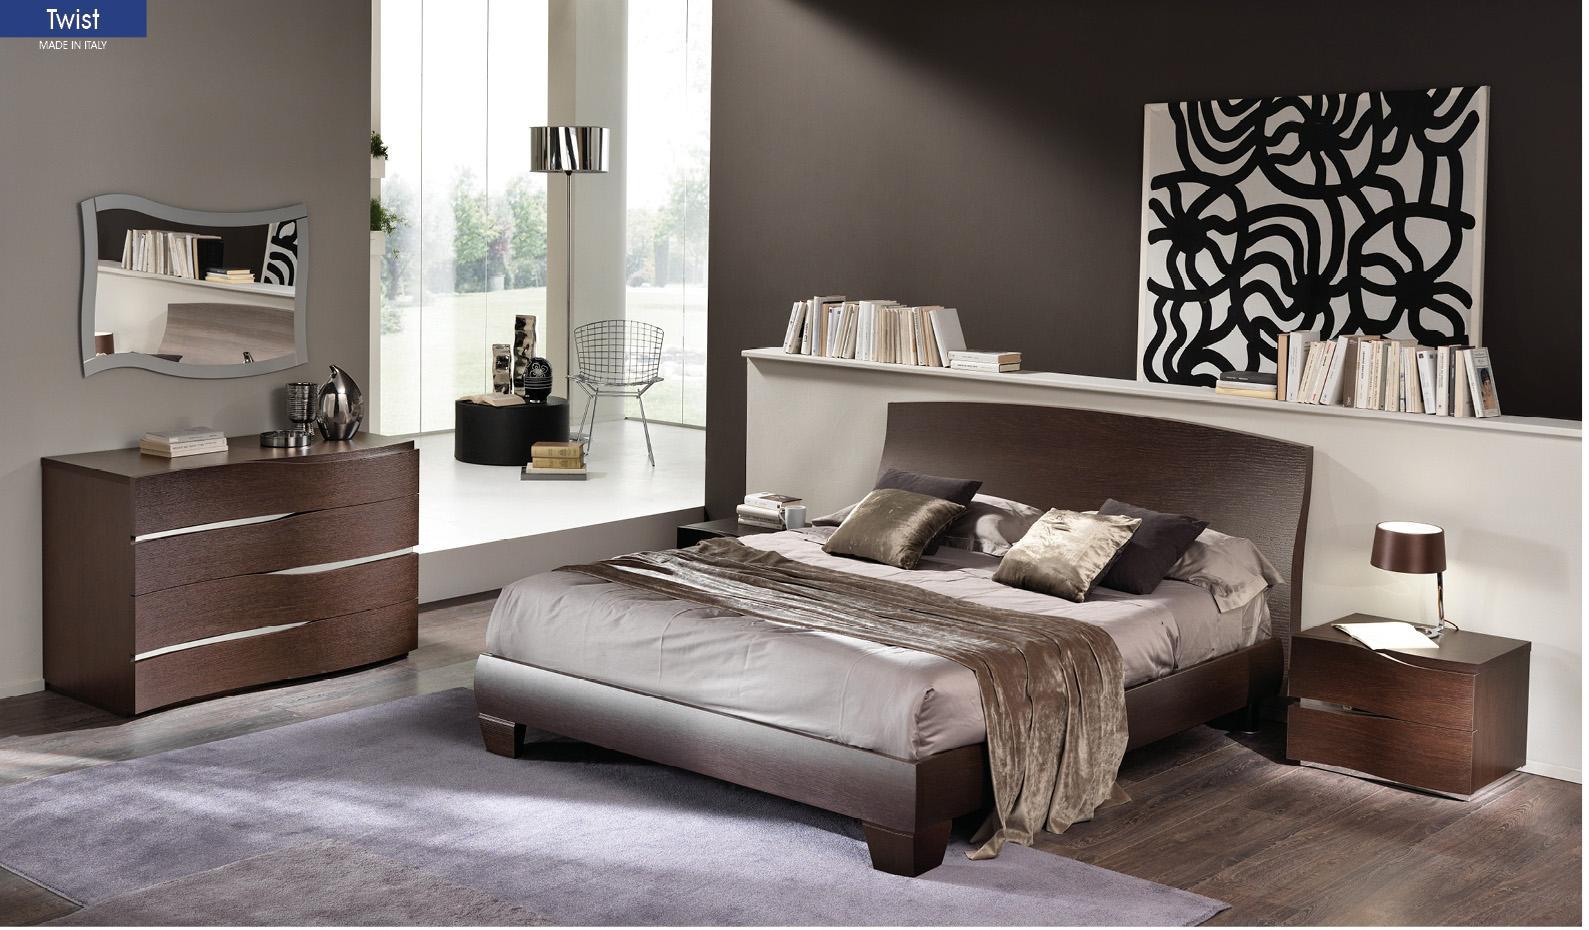 

    
ESF Twist Wenge Waved Headboard King Bedroom Set 5 Contemporary Made in Italy
